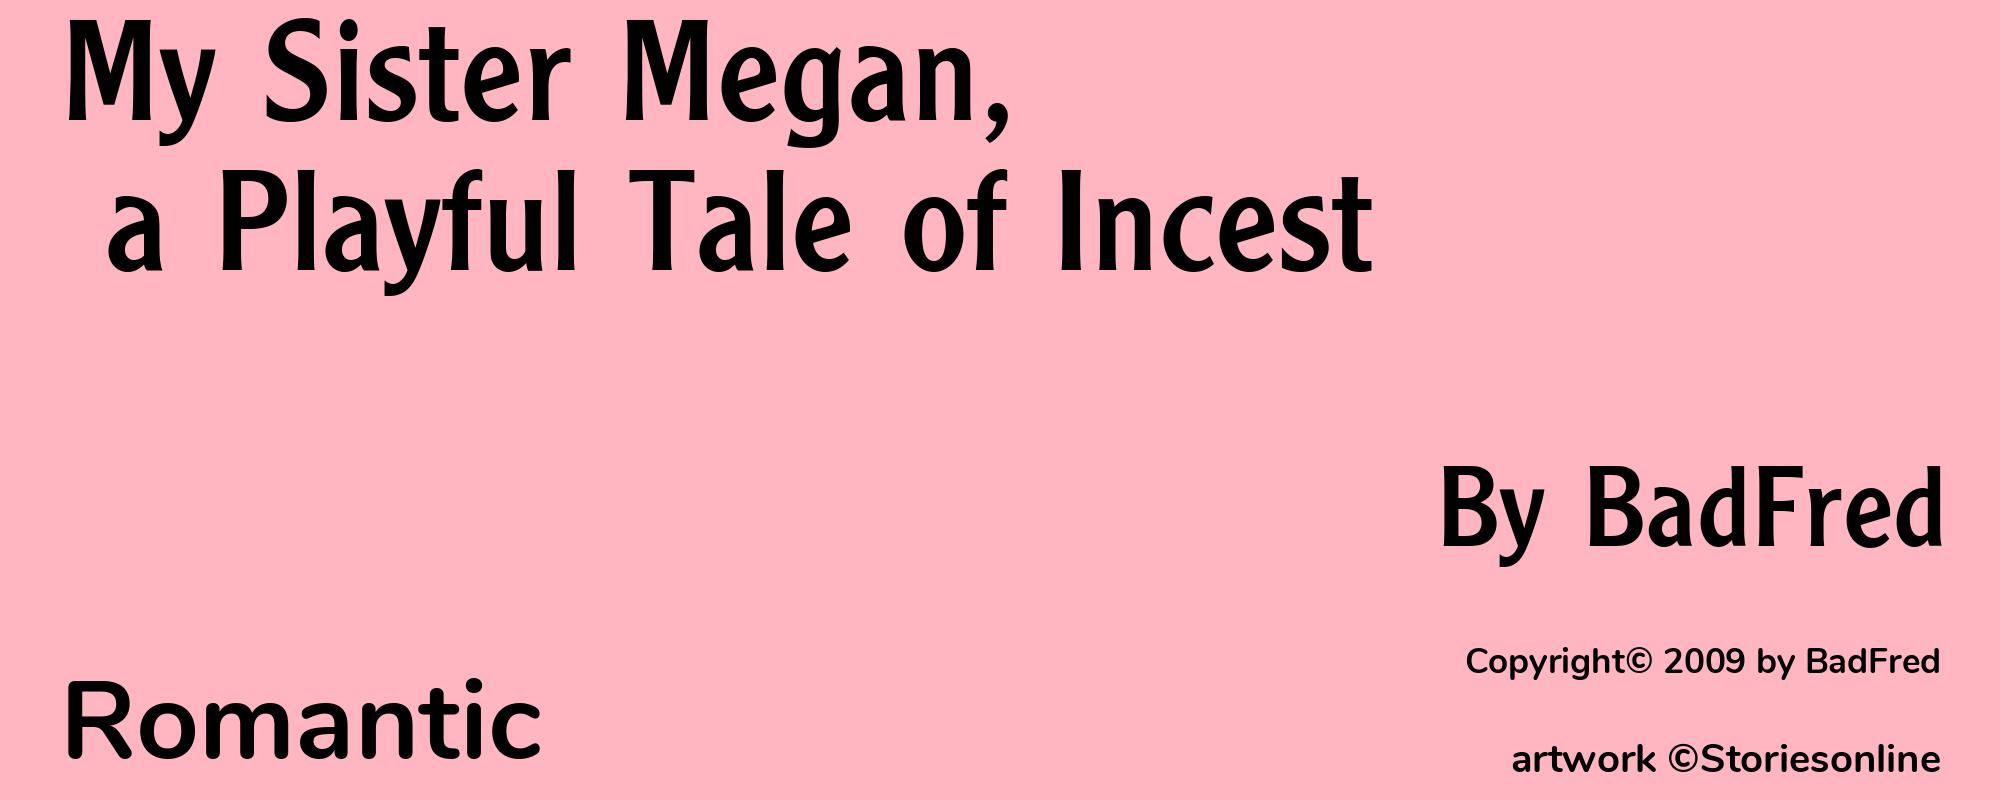 My Sister Megan, a Playful Tale of Incest - Cover